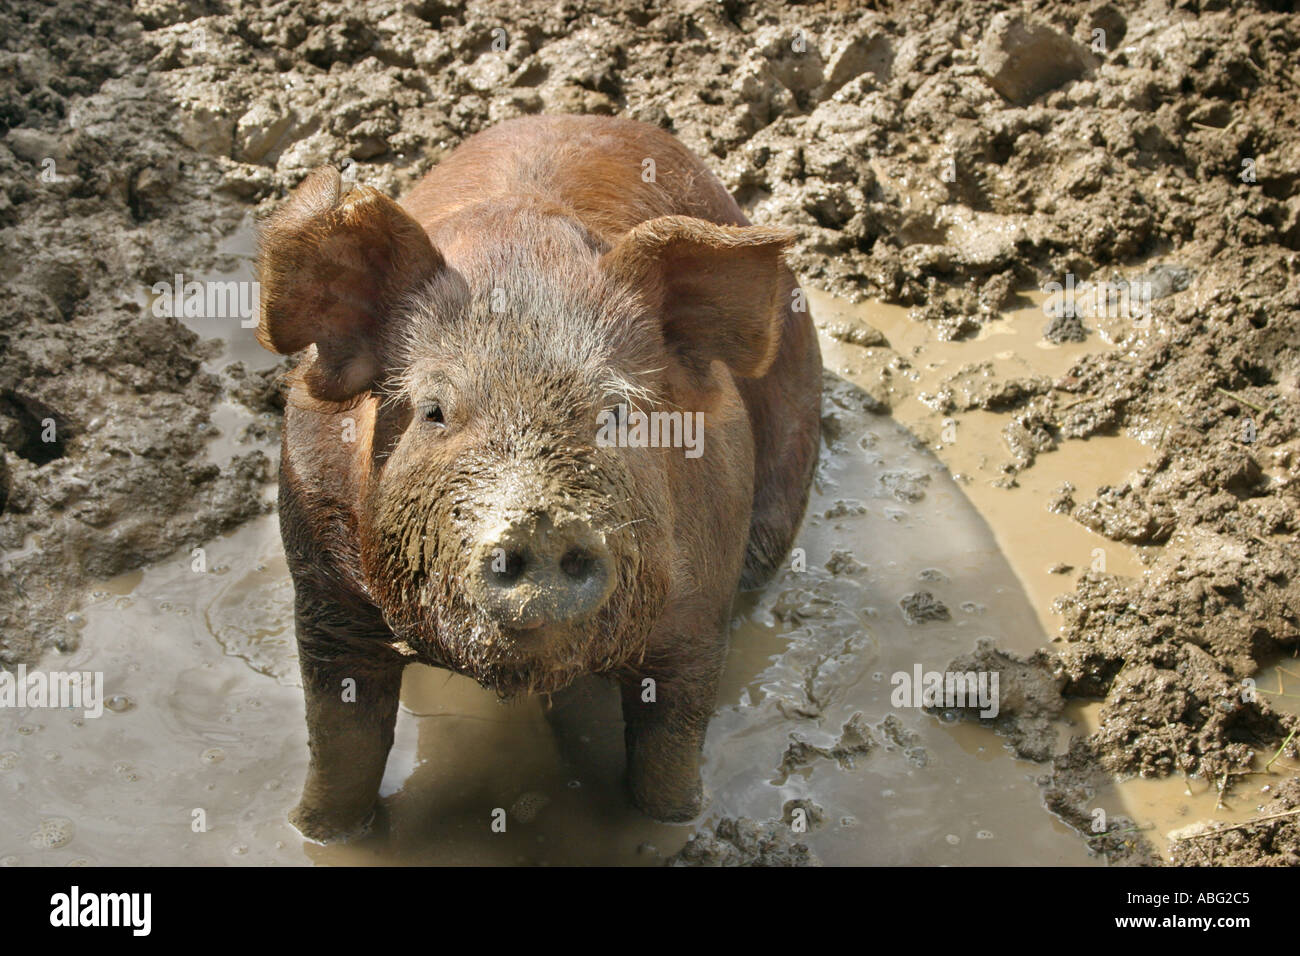 Red Weaner Pig Sitting in Mud Puddle Stock Photo